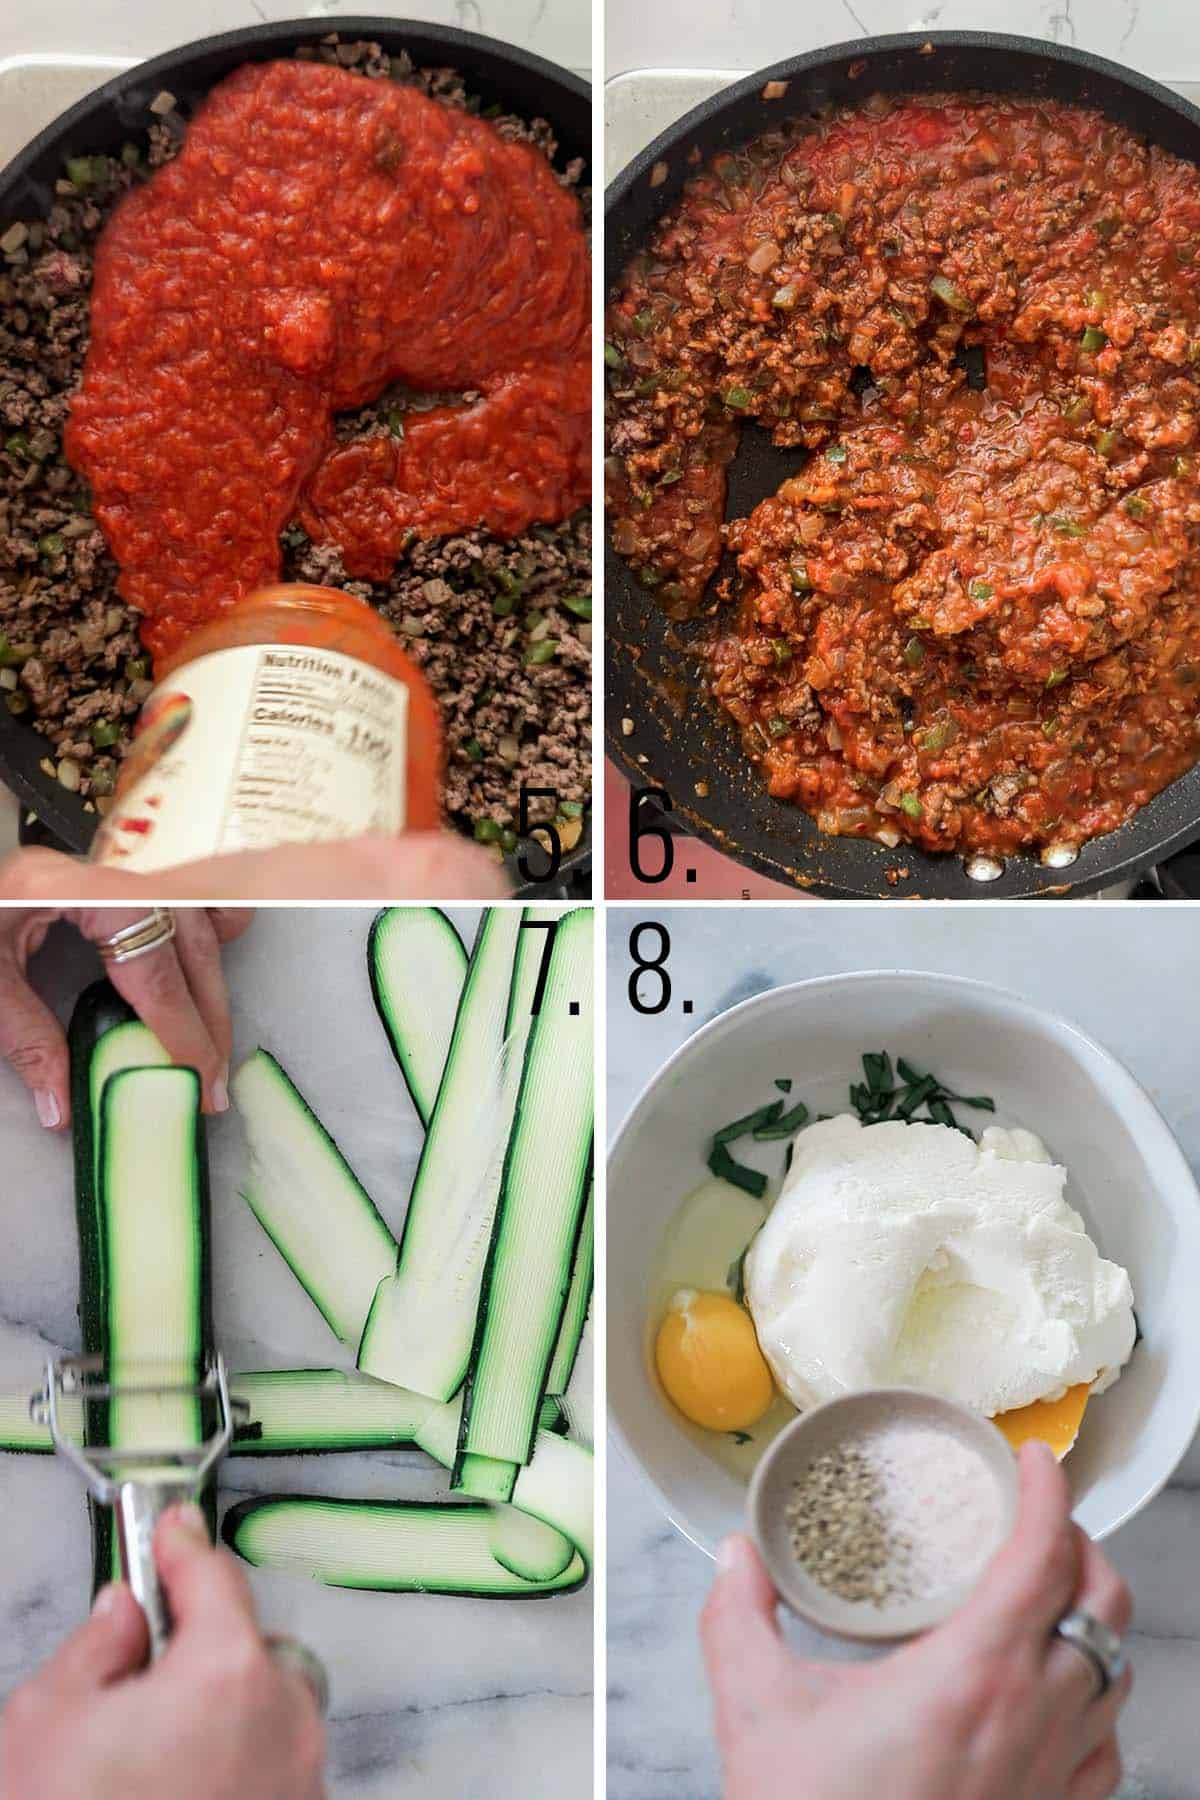 How to make the filling for keto lasagna.